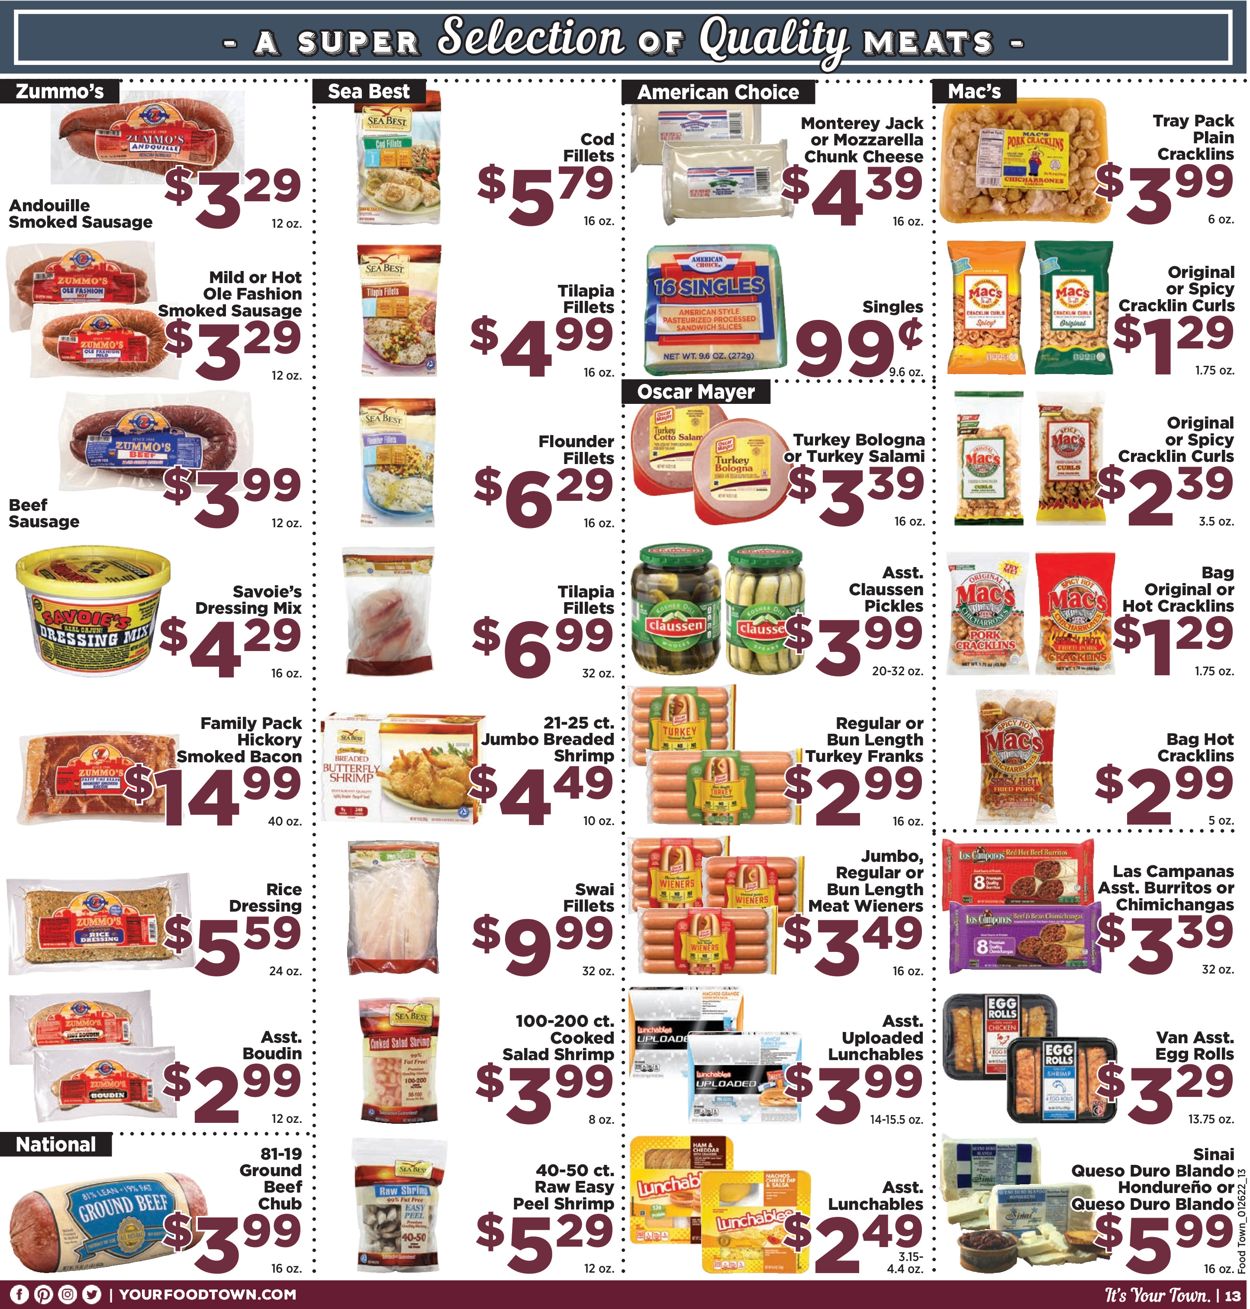 Food Town Ad from 01/26/2022